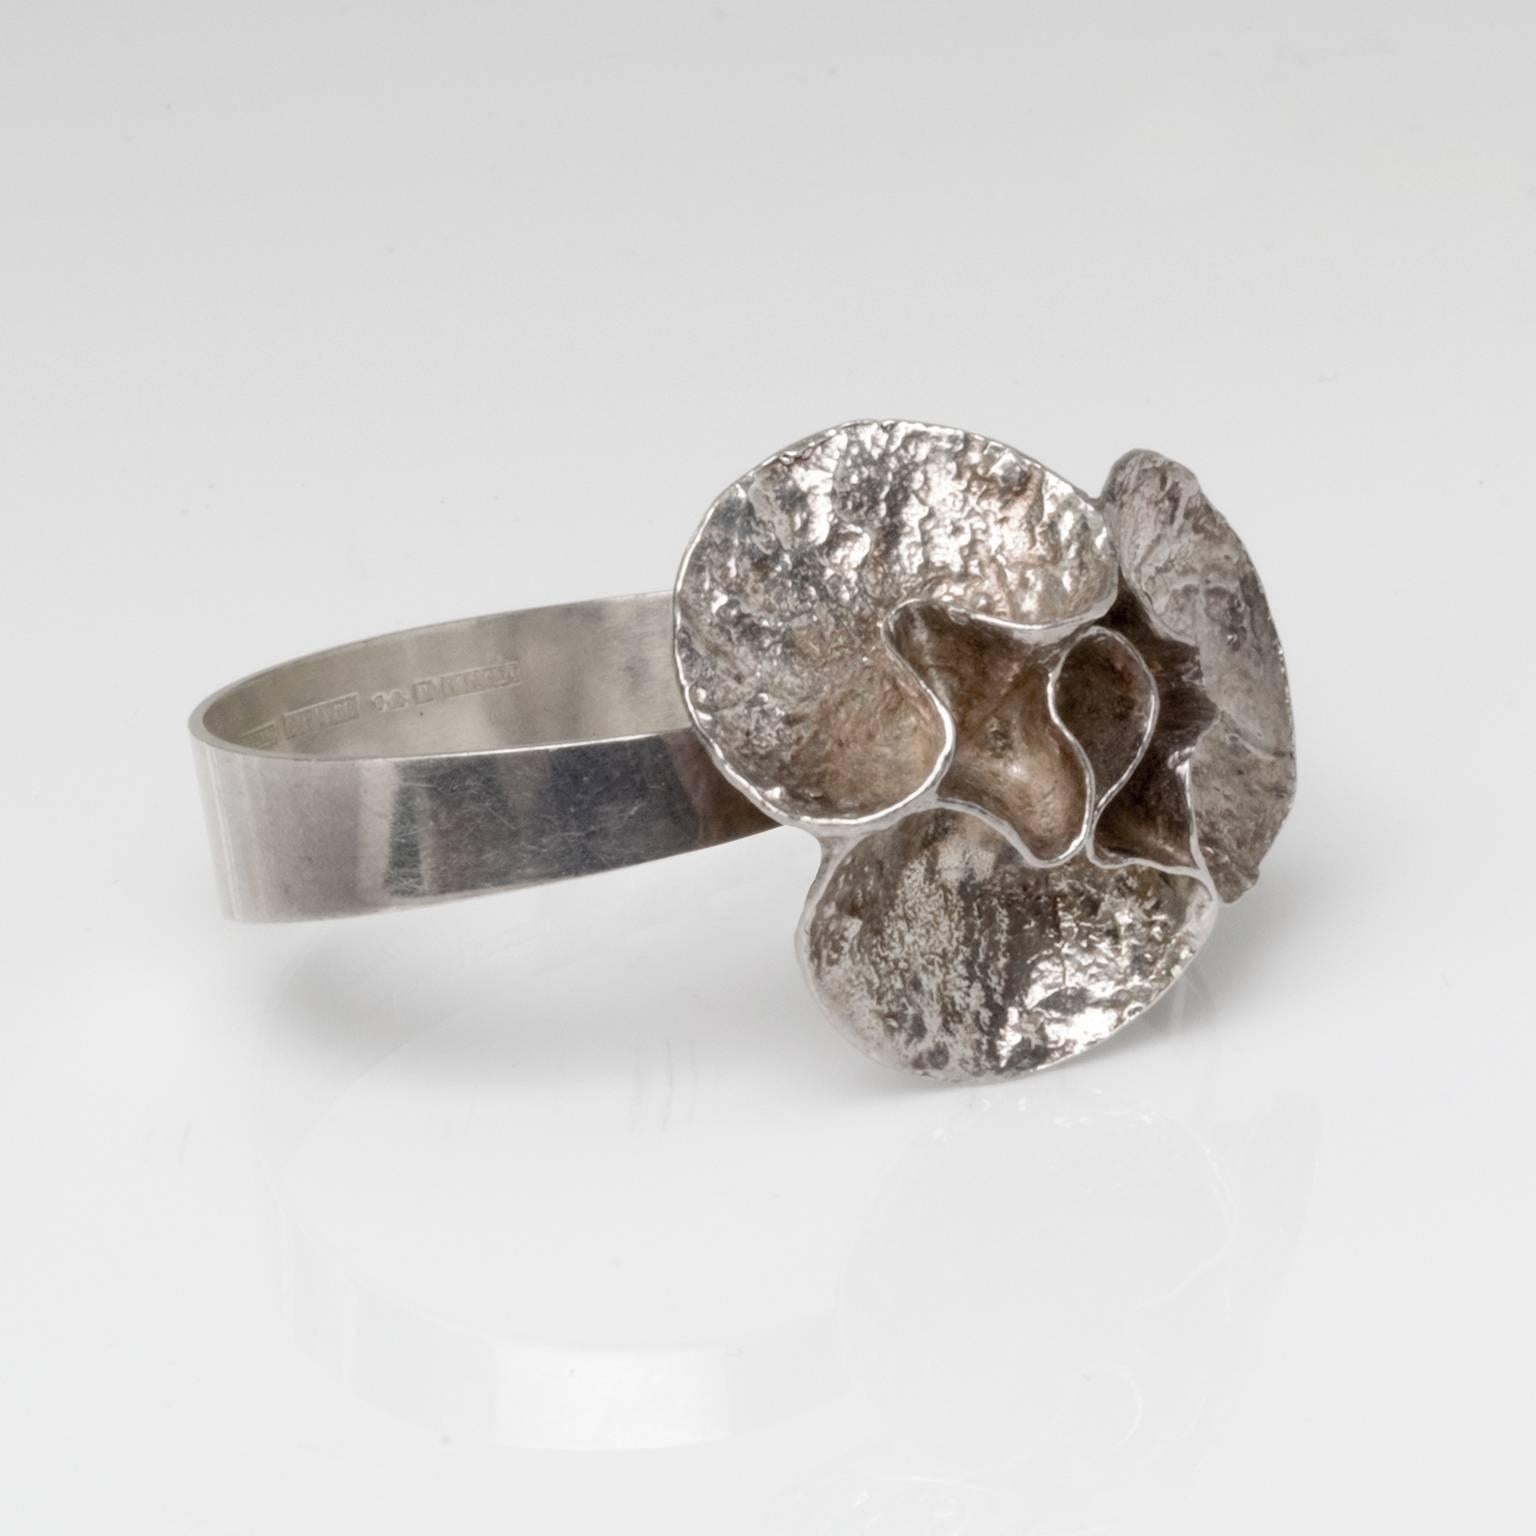 Silver bracelet with acid treated surface by Theresia Hvorslev and stamped 'Mema', Lidkoping, Sweden, 1976.